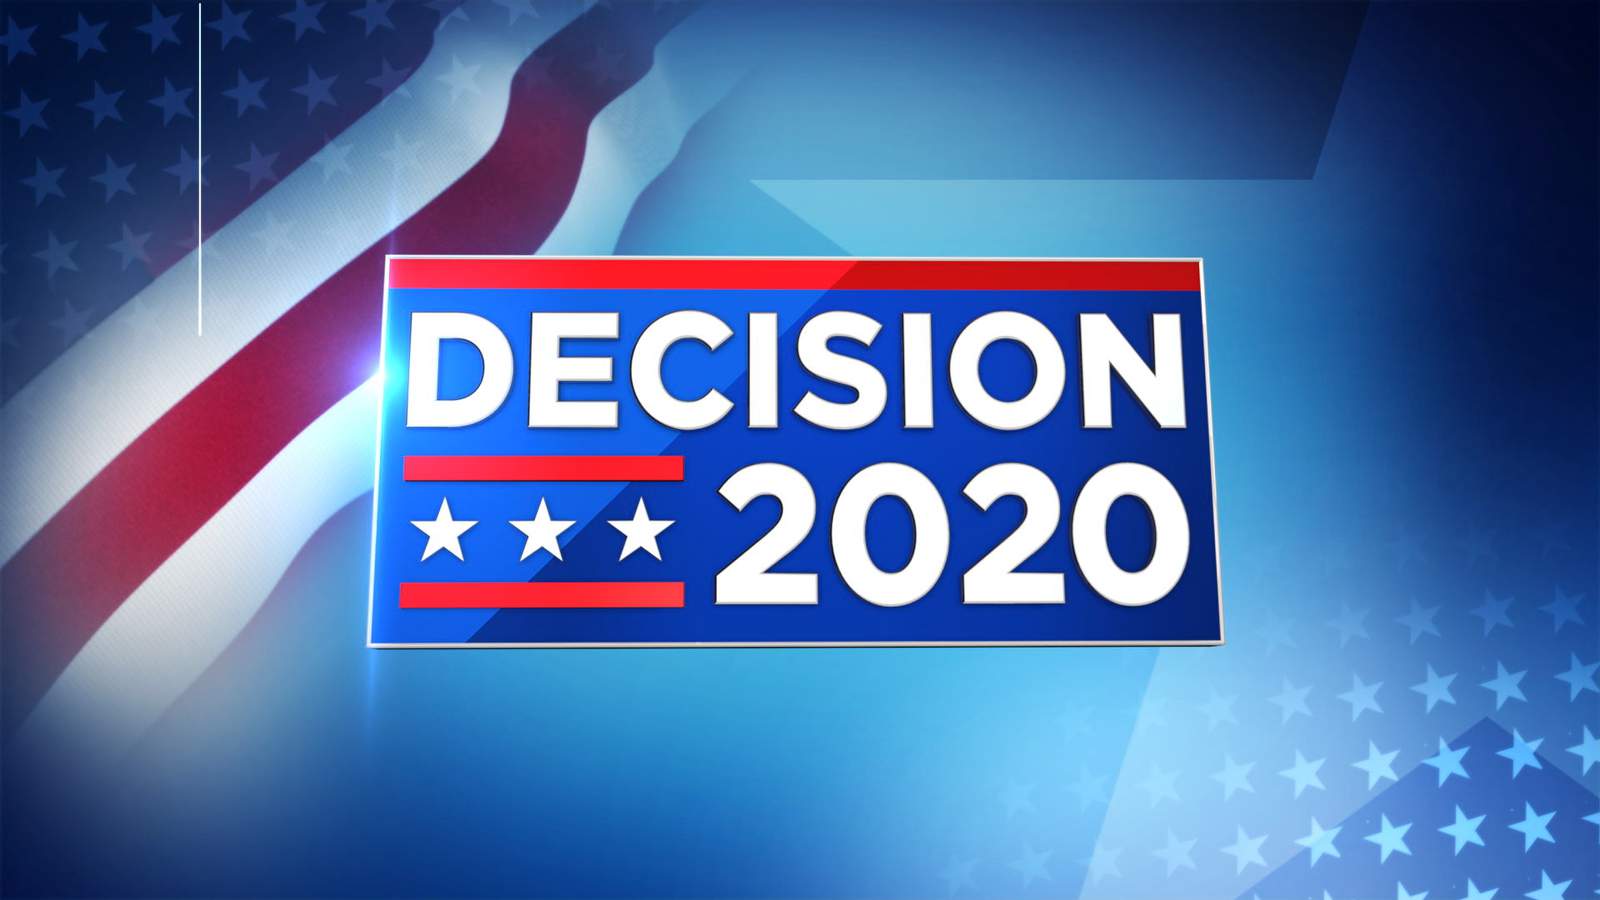 Democratic Presidential Primary Election Results for Stafford County on March 3, 2020